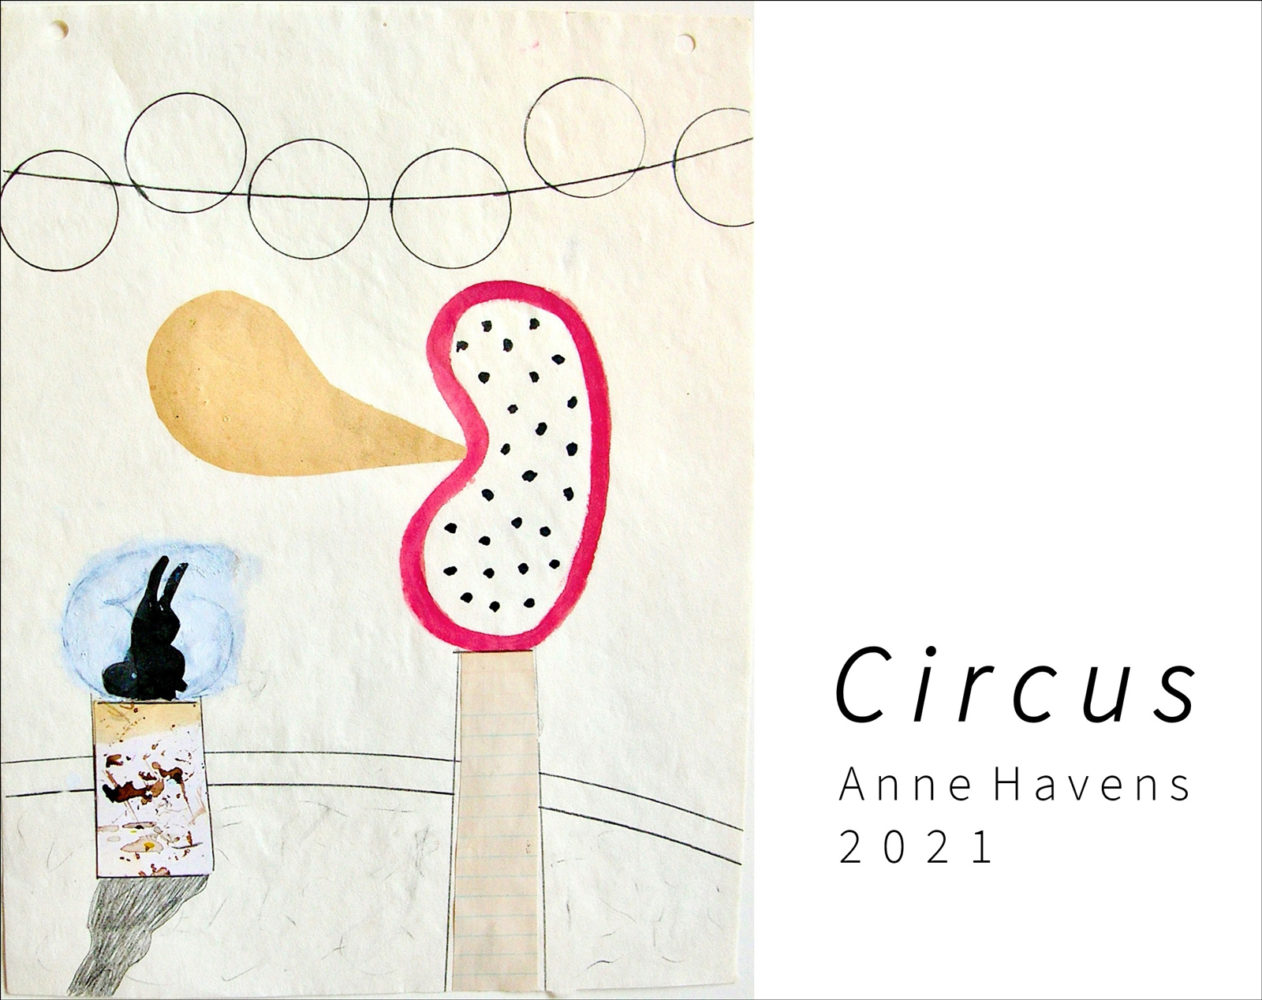 Cover of Anne Havens "Circus" 2021